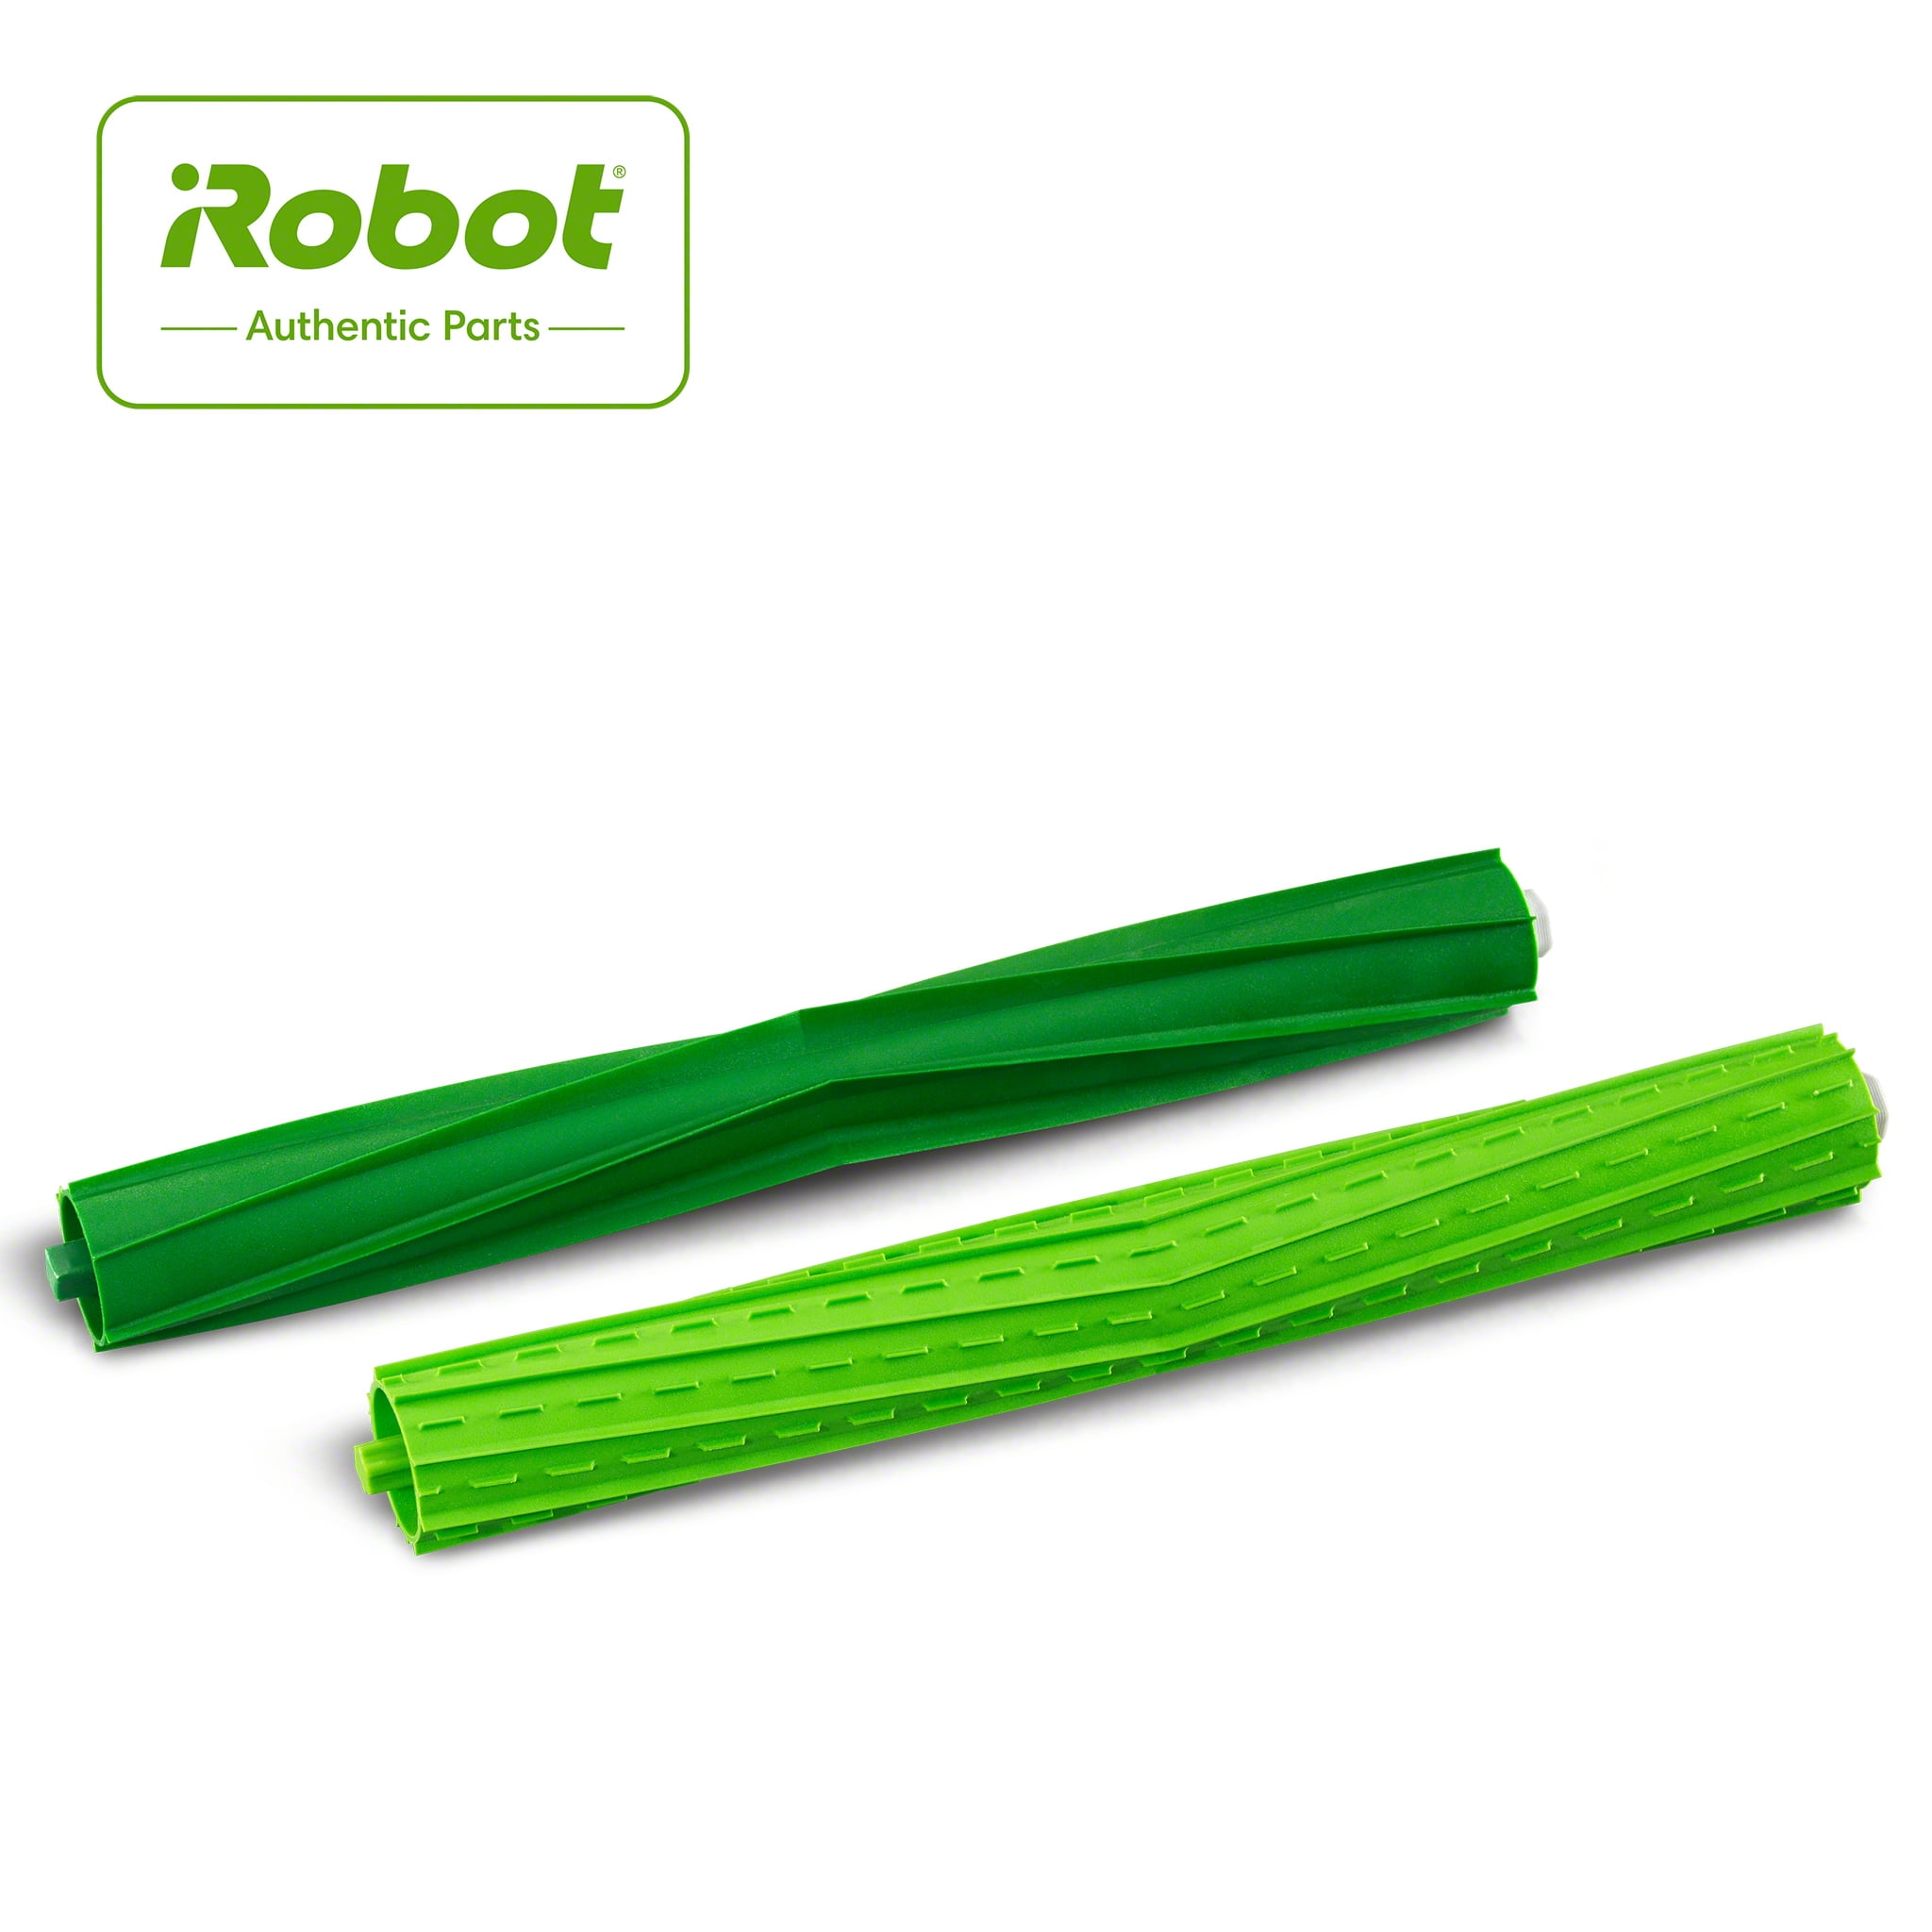 iRobot Authentic Replacement Parts- Roomba e & i Series Replacement Dual Multi-Surface Brushes Walmart.com